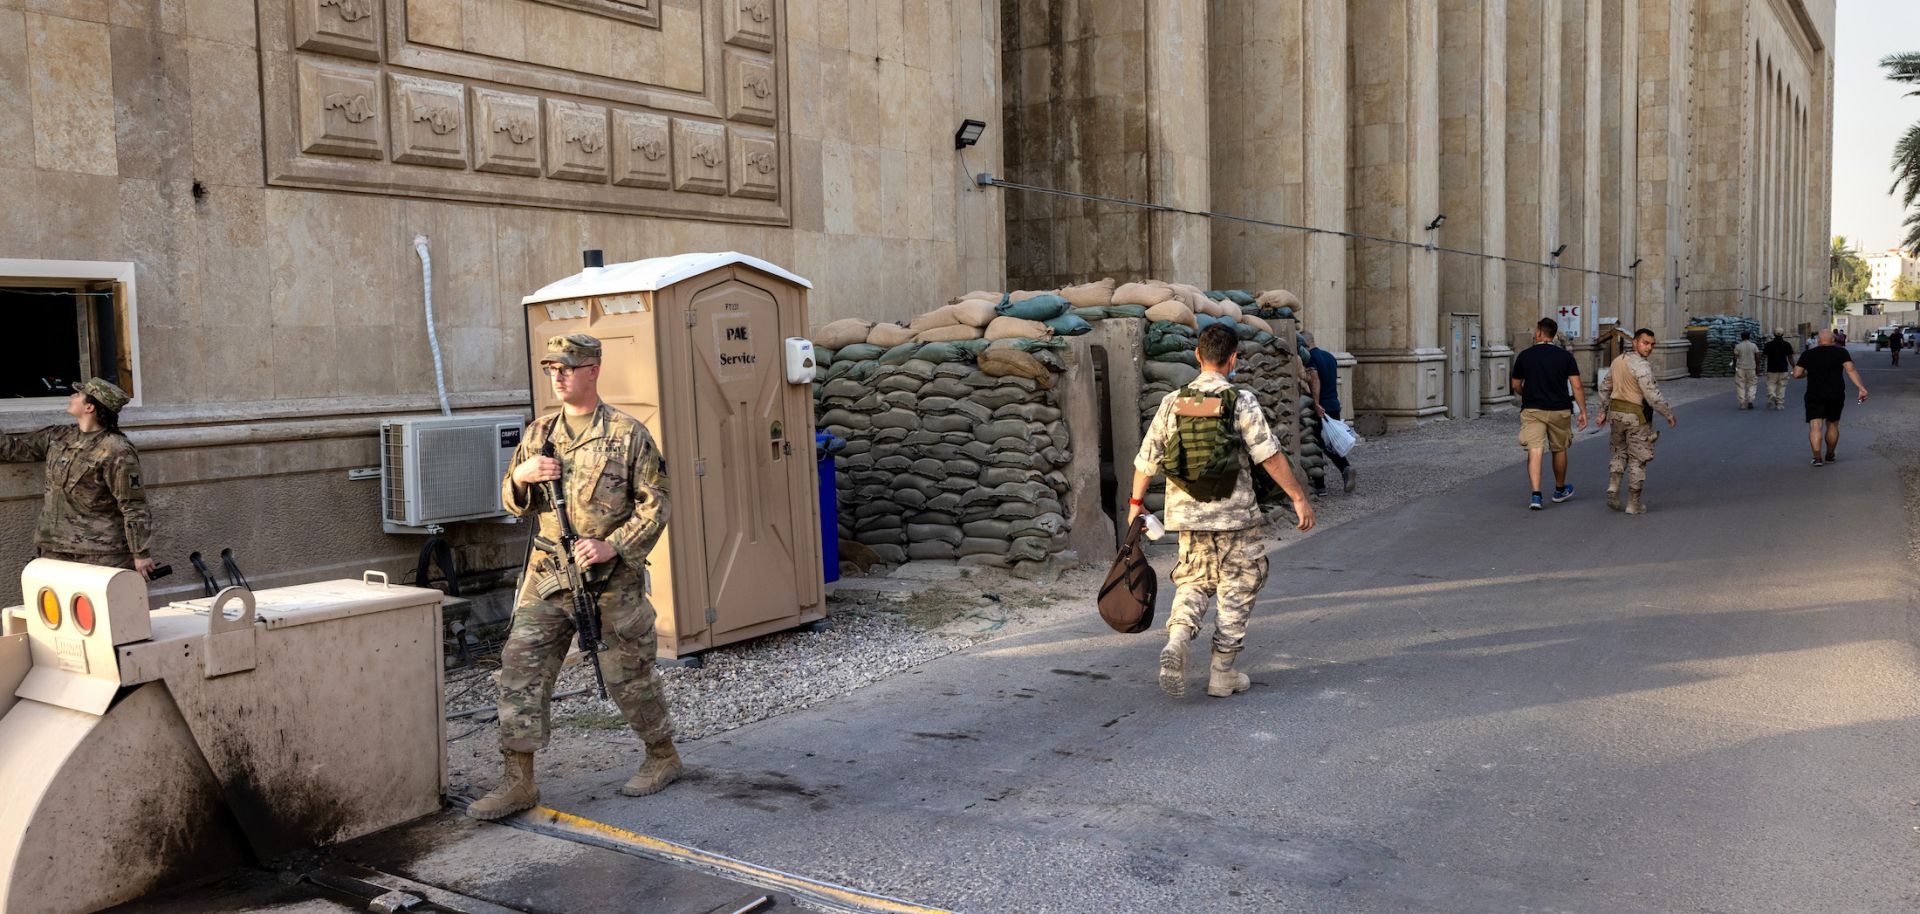 U.S. soldiers (L) on May 30, 2021, next to the former Baath Party headquarters near the entrance to the Green Zone in Baghdad.